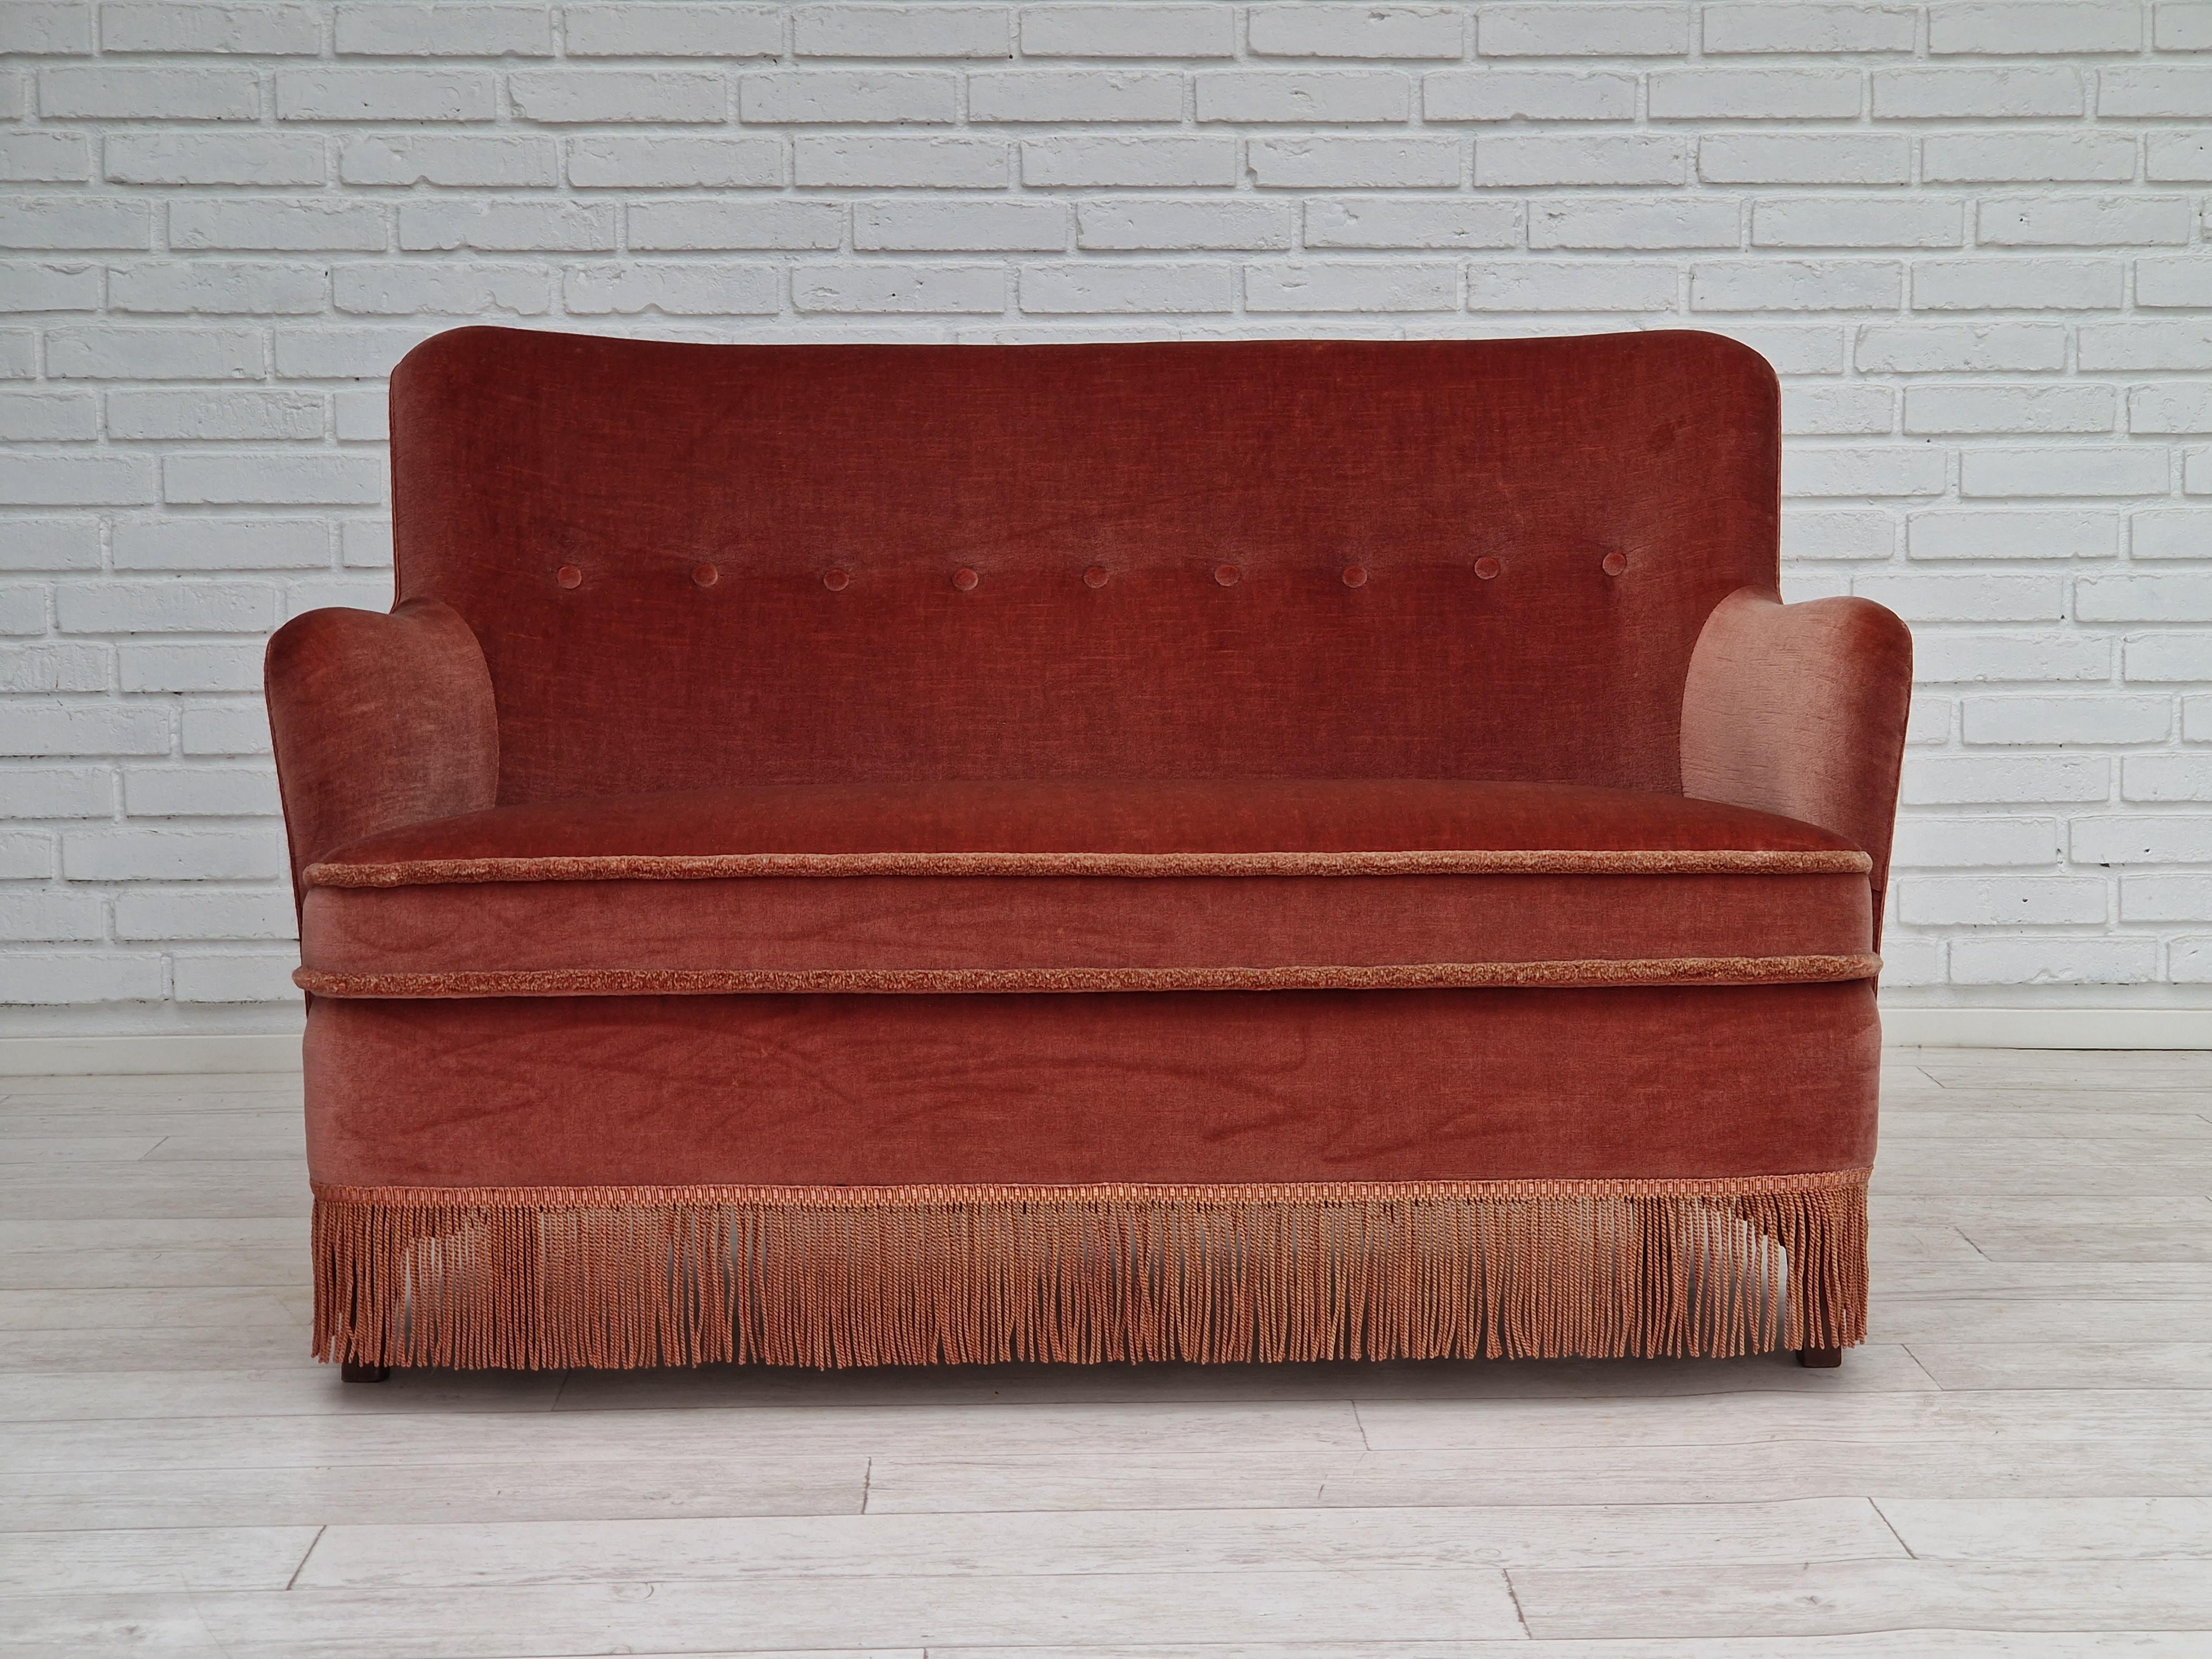 1970s, Danish design. Little 2 seater sofa. Original upholstery in light red velour with nice patina, very good condition. Beech wood legs, springs in the seat. No smells, no stains. Made in about 1970 by Danish furniture manufacturer.